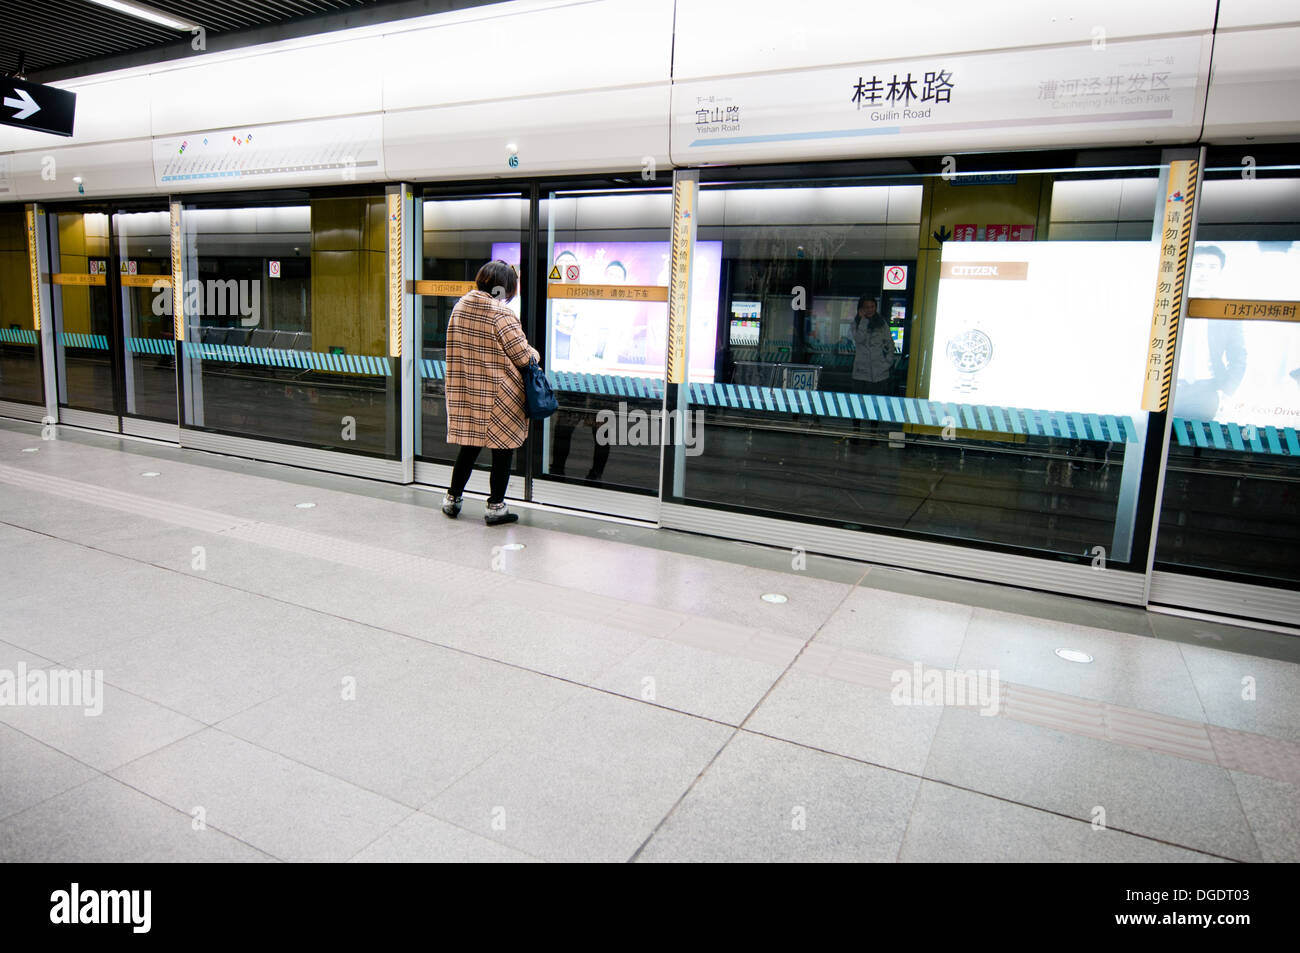 Guilin Road Station Line 9 metro station in Shanghai, China Stock Photo